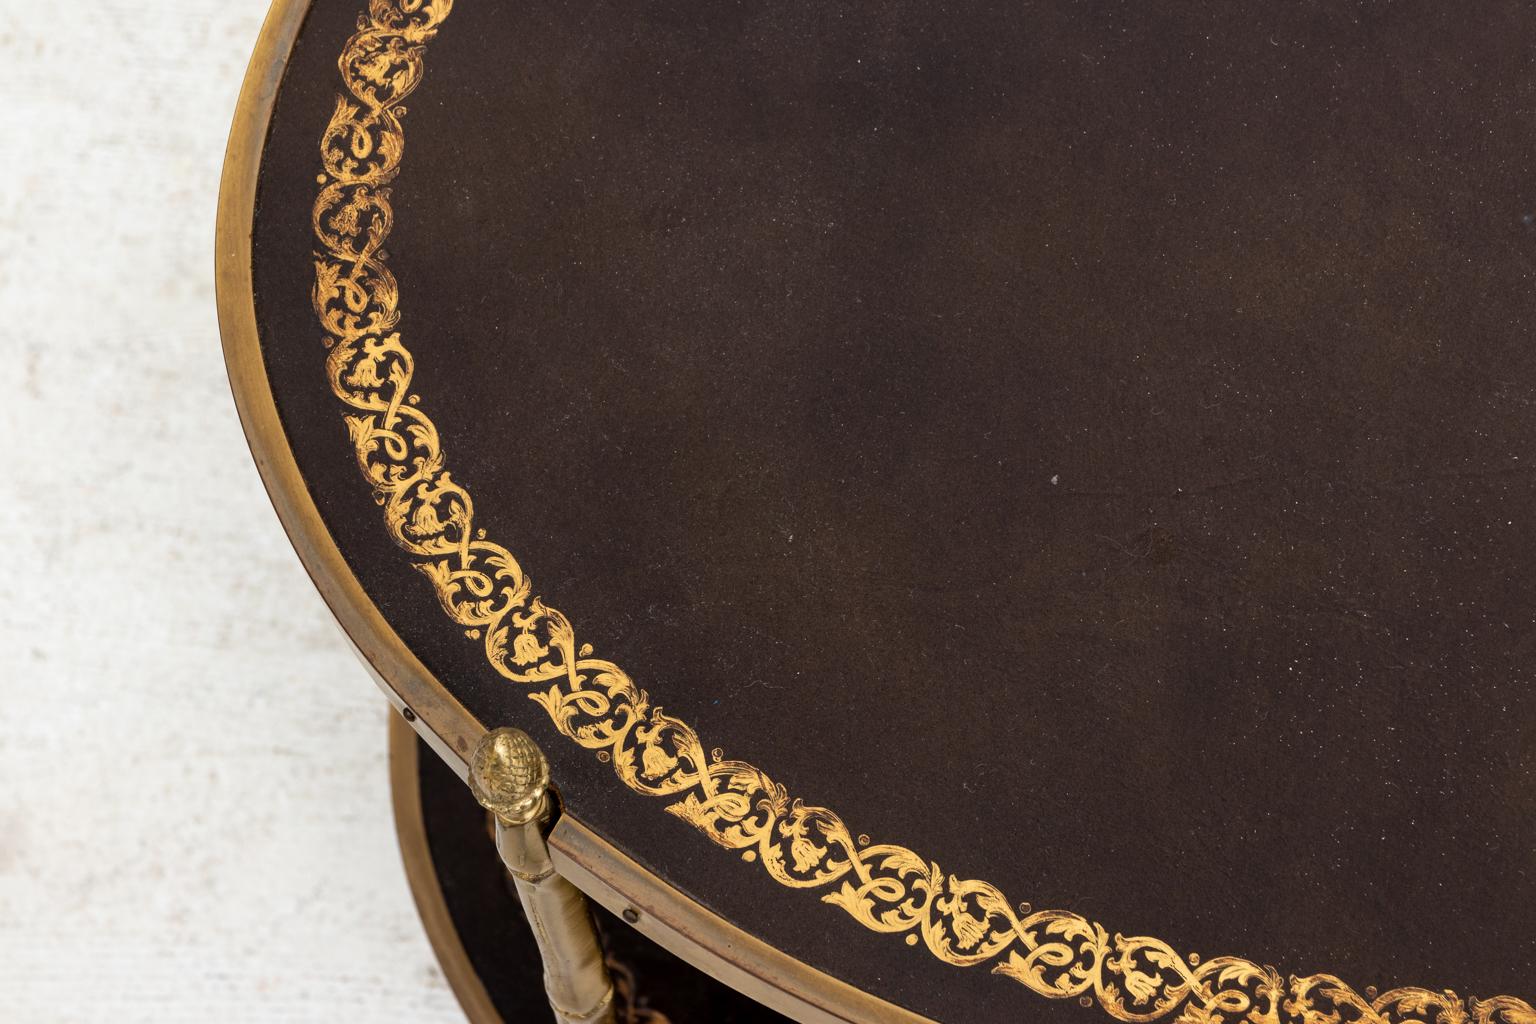 English Regency style two-tier oval cocktail table with embossed leather tops and brass faux bamboo legs, circa 1980s. The leather top is decorated with embossed foliage trim. Please note of wear consistent with age.